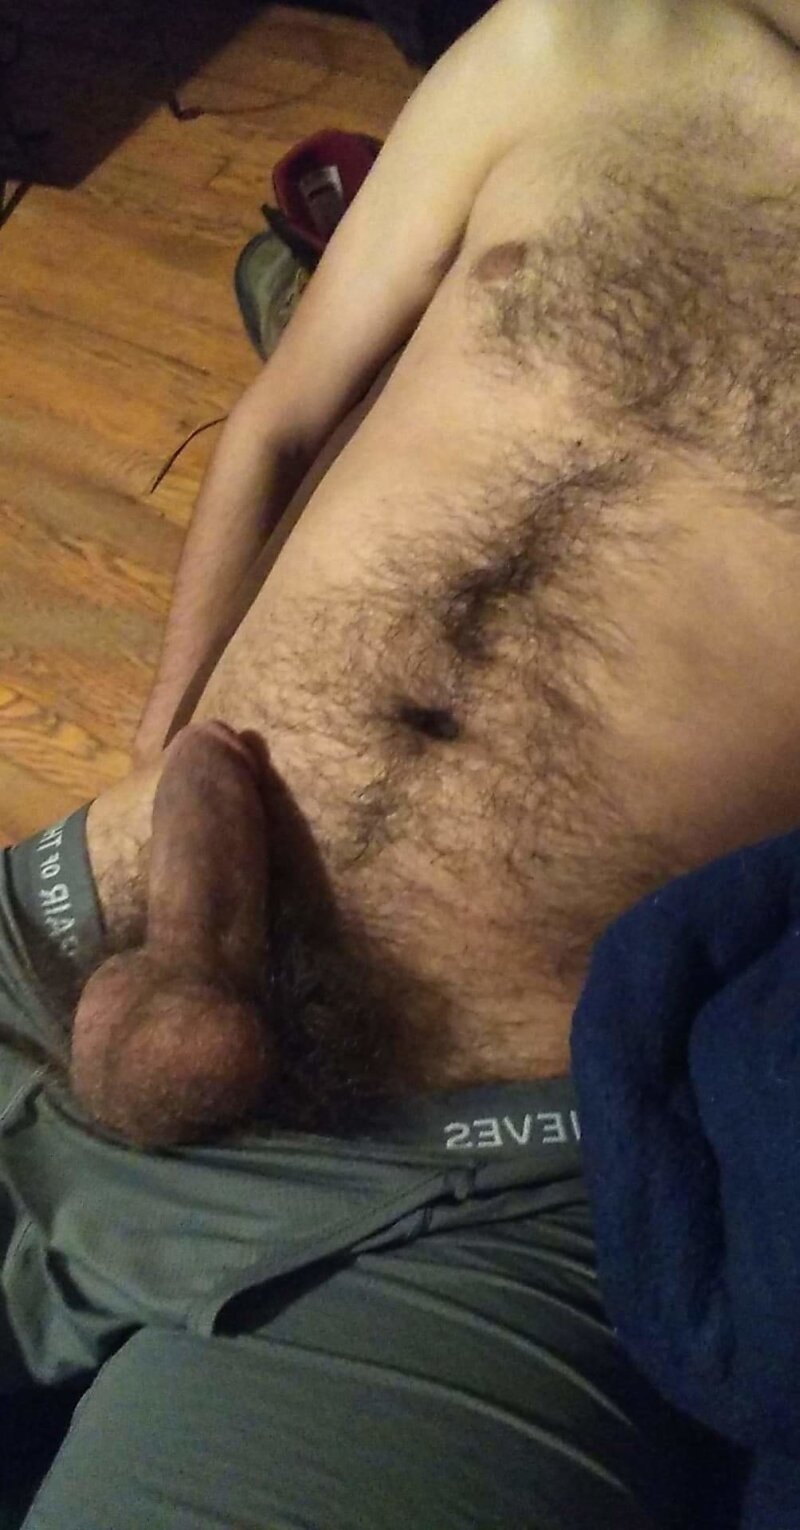 Showing off my cock picture